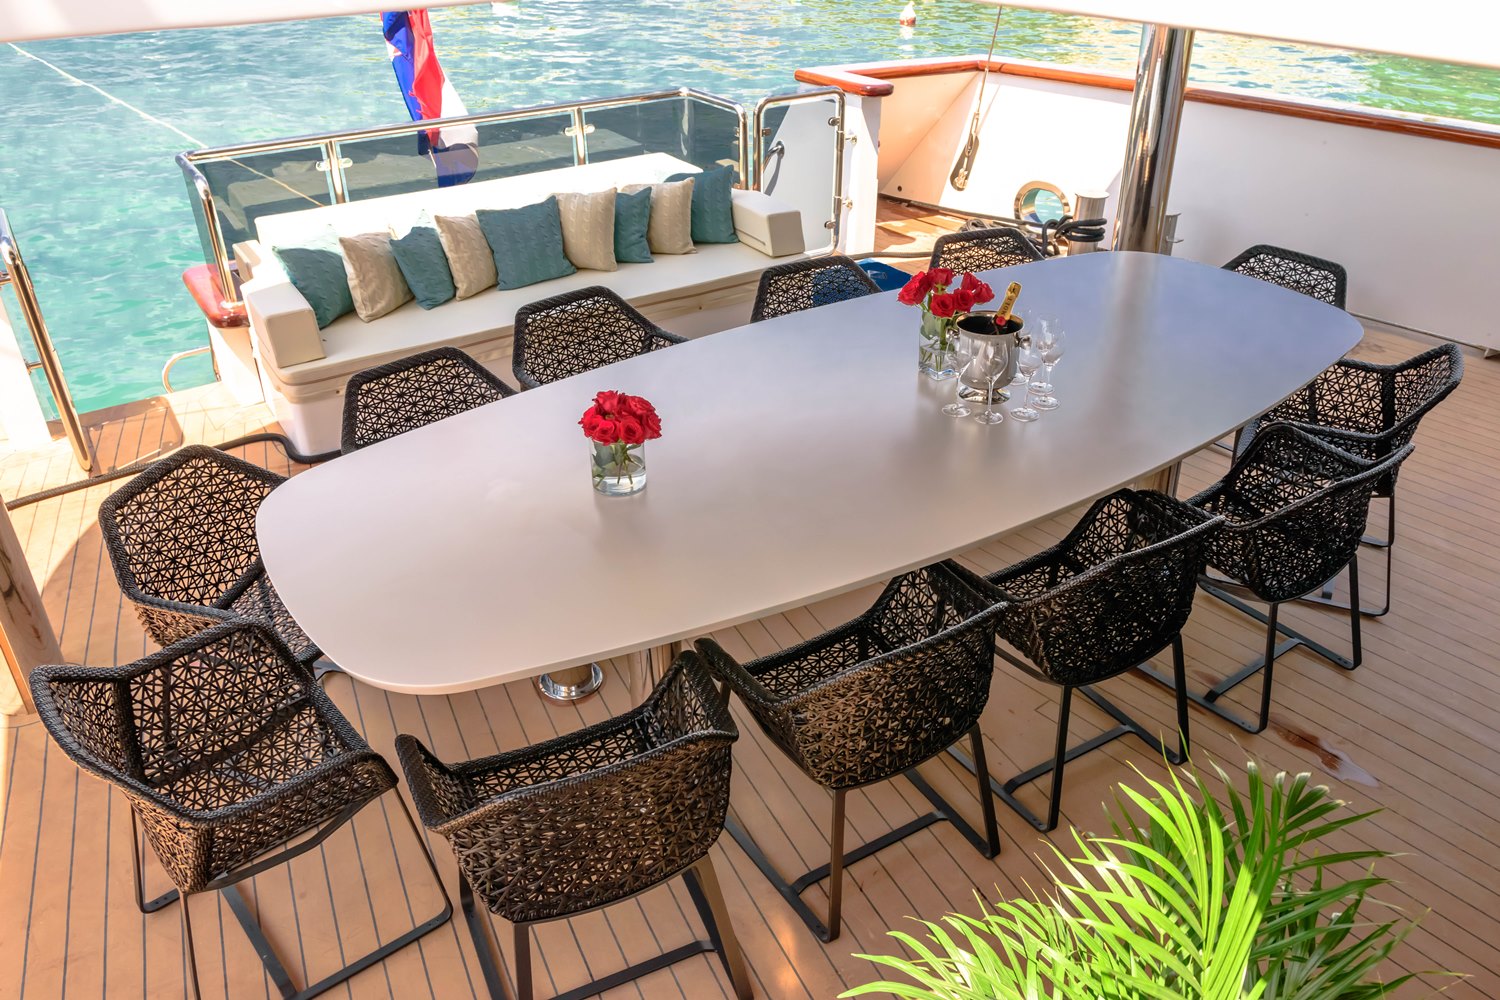 Alfresco dining area on the aft deck